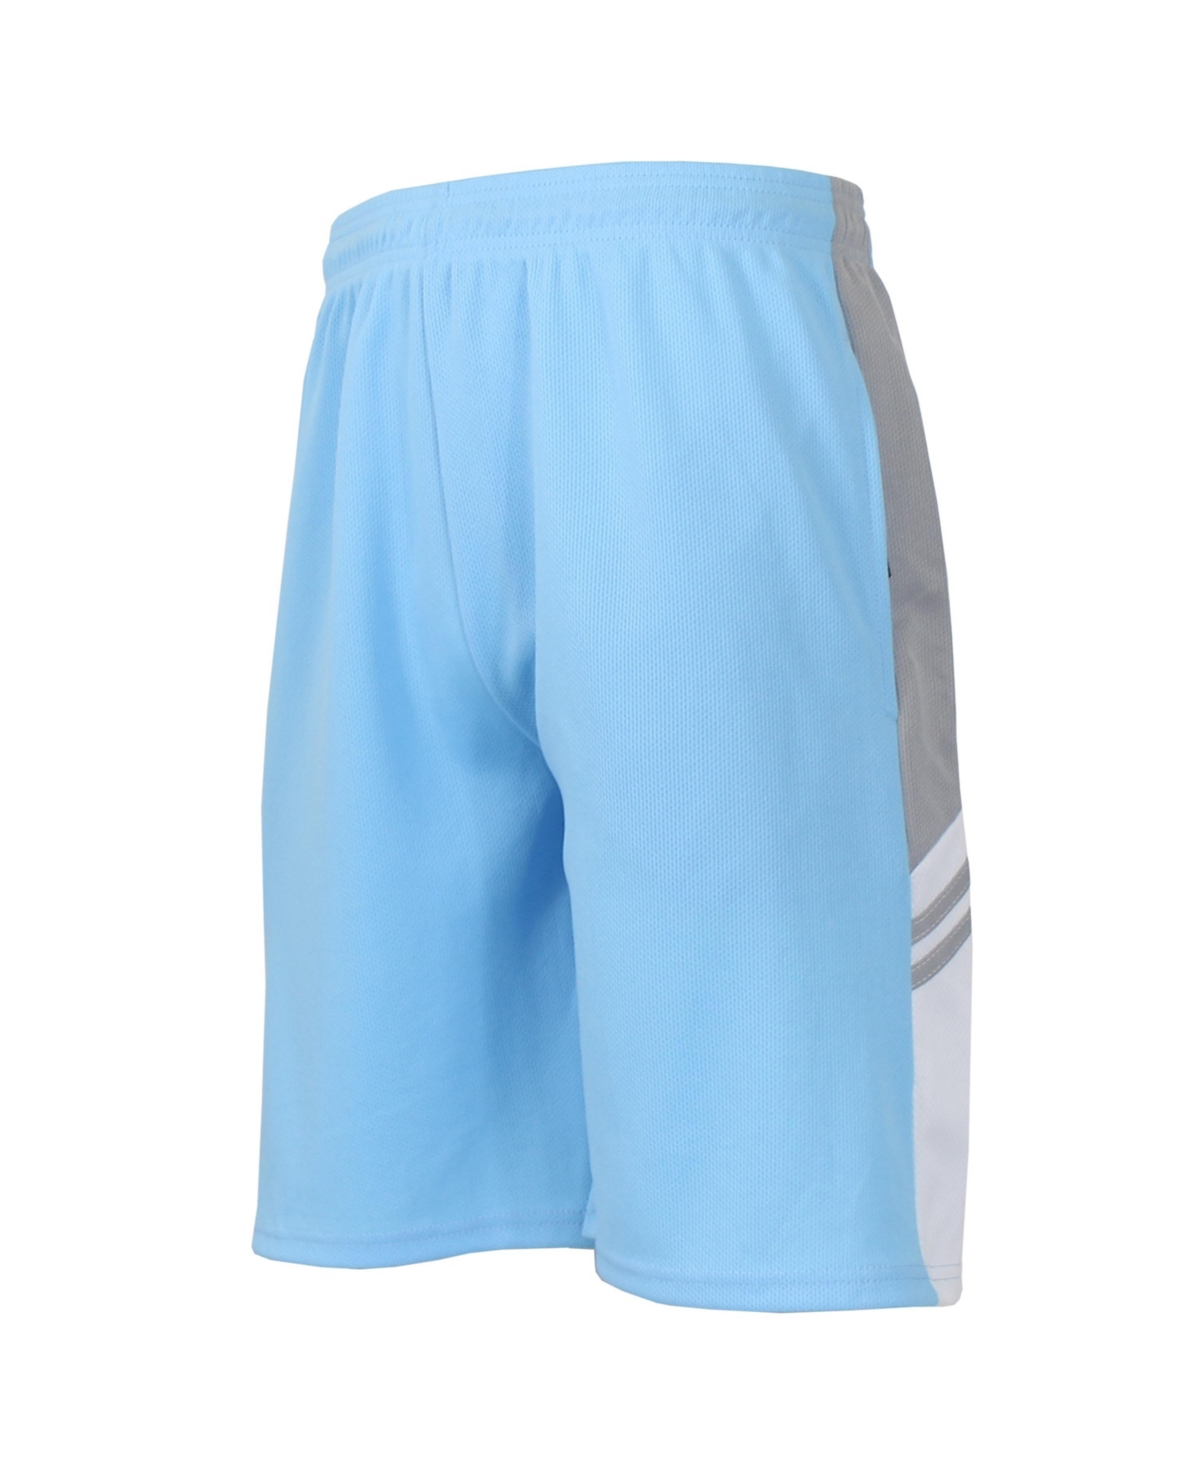 Men's Moisture Wicking Shorts with Side Trim Design - Silver-Tone